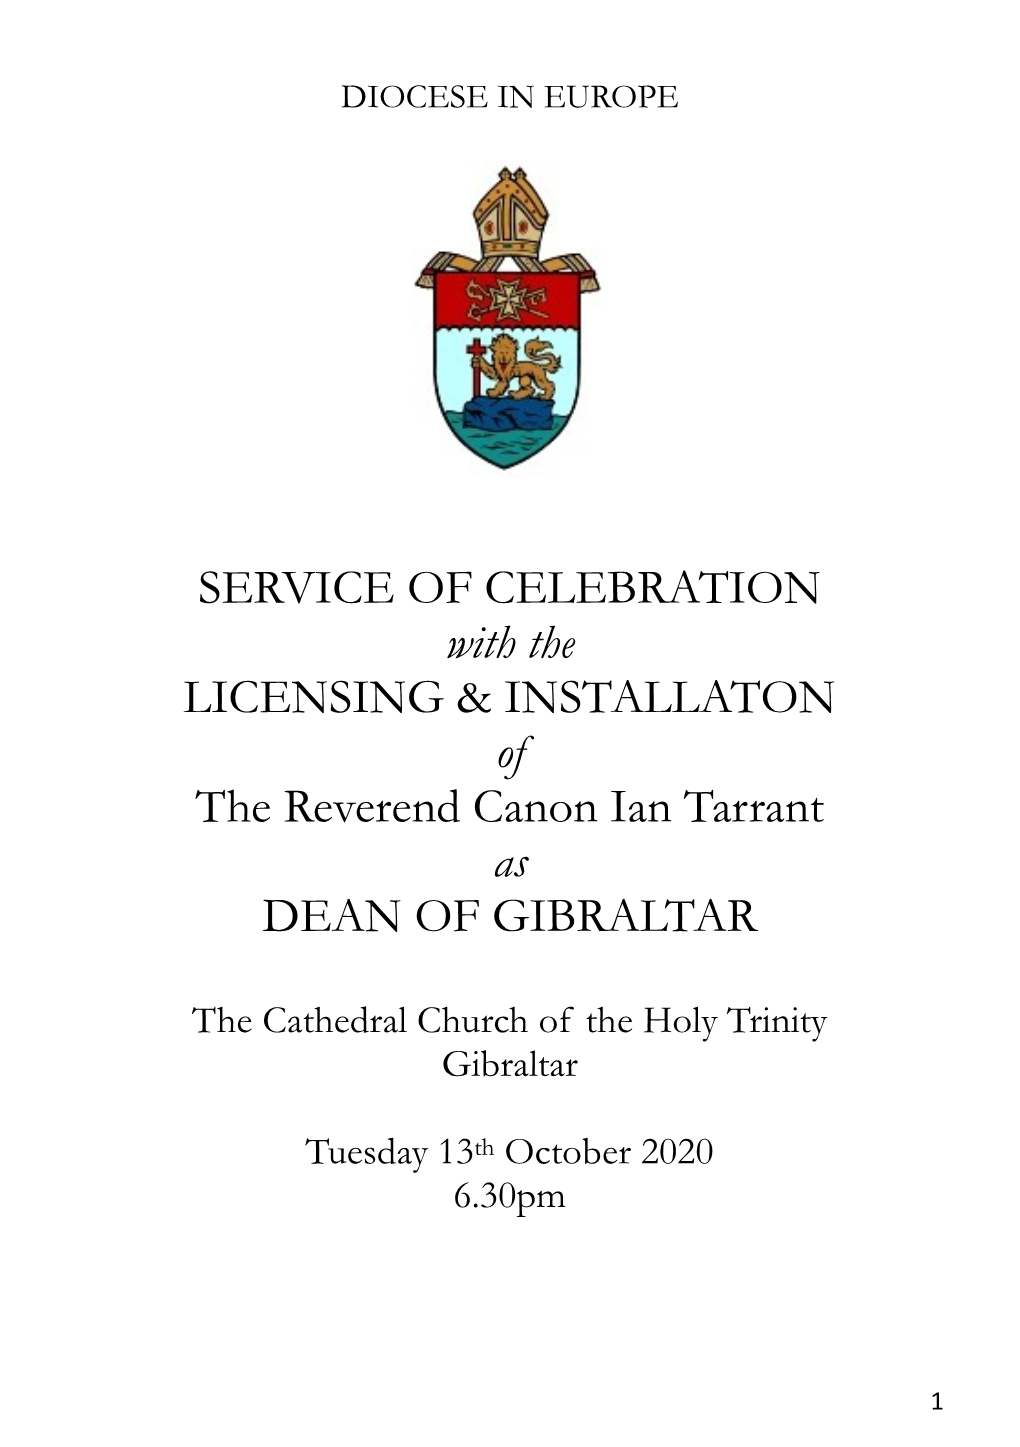 SERVICE of CELEBRATION with the LICENSING & INSTALLATON Of